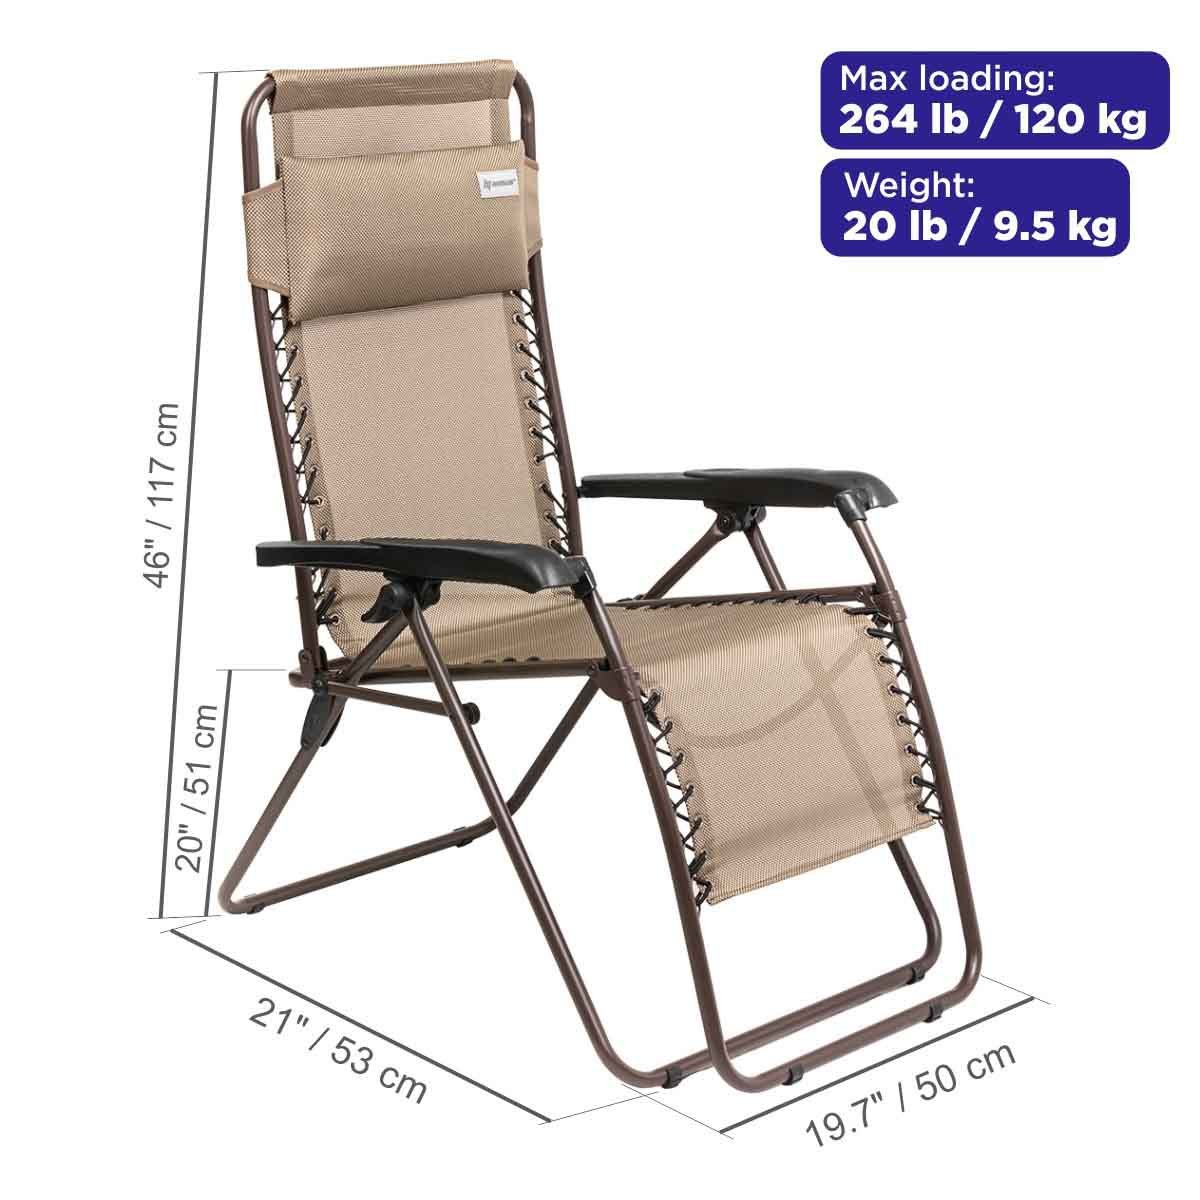 Zero Gravity Folding Patio Chair with Padded Pillow, Beige carries up to 264 lbs, weighing only 20 lbs. It is 46 inches high, 21 inches long, 19.7 inches wide and 20 inches deep